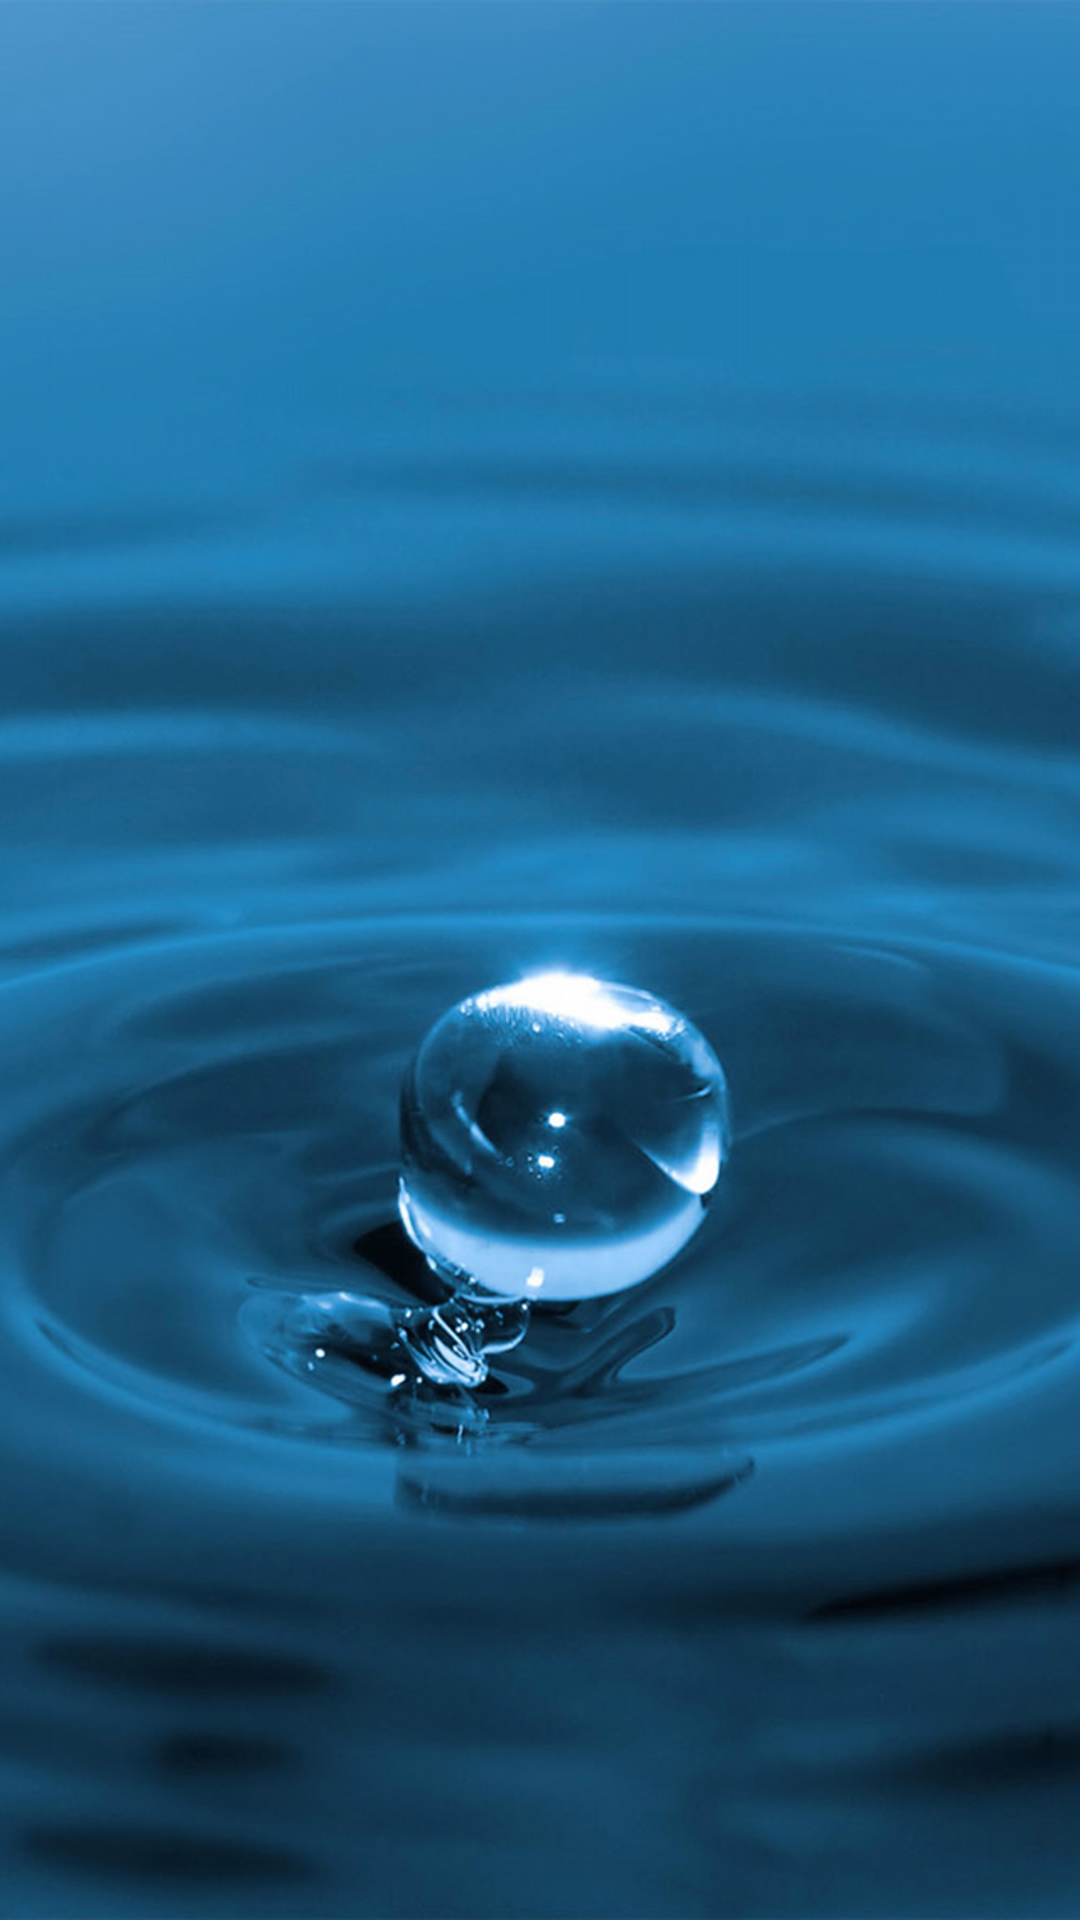 droplet iPhone 6 Wallpapers | iPhone Wallpapers, iPad wallpapers ...